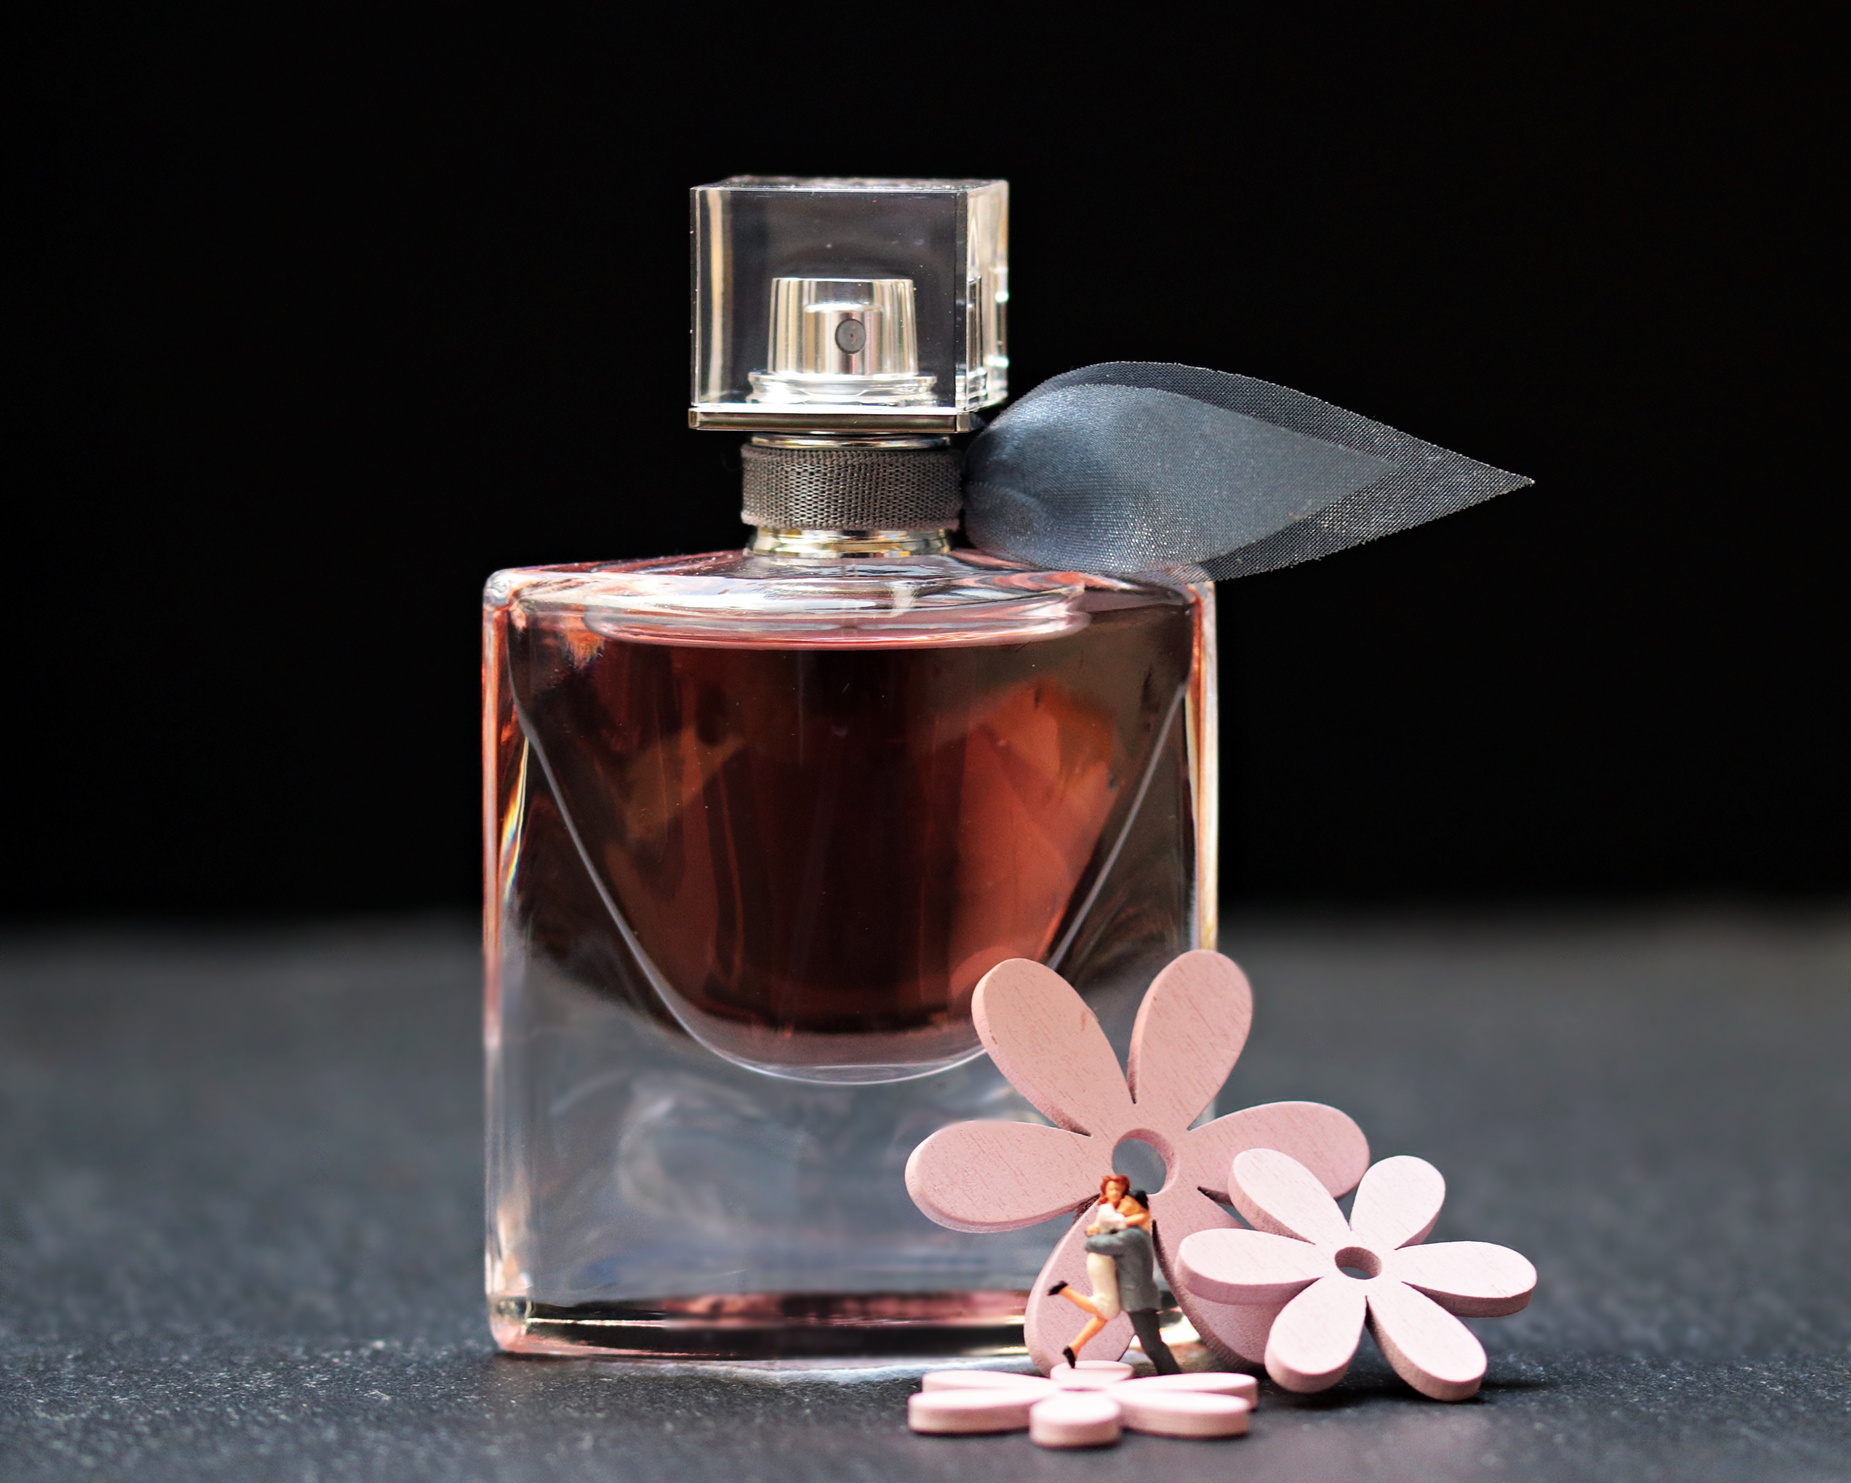 Perfume and Flowers